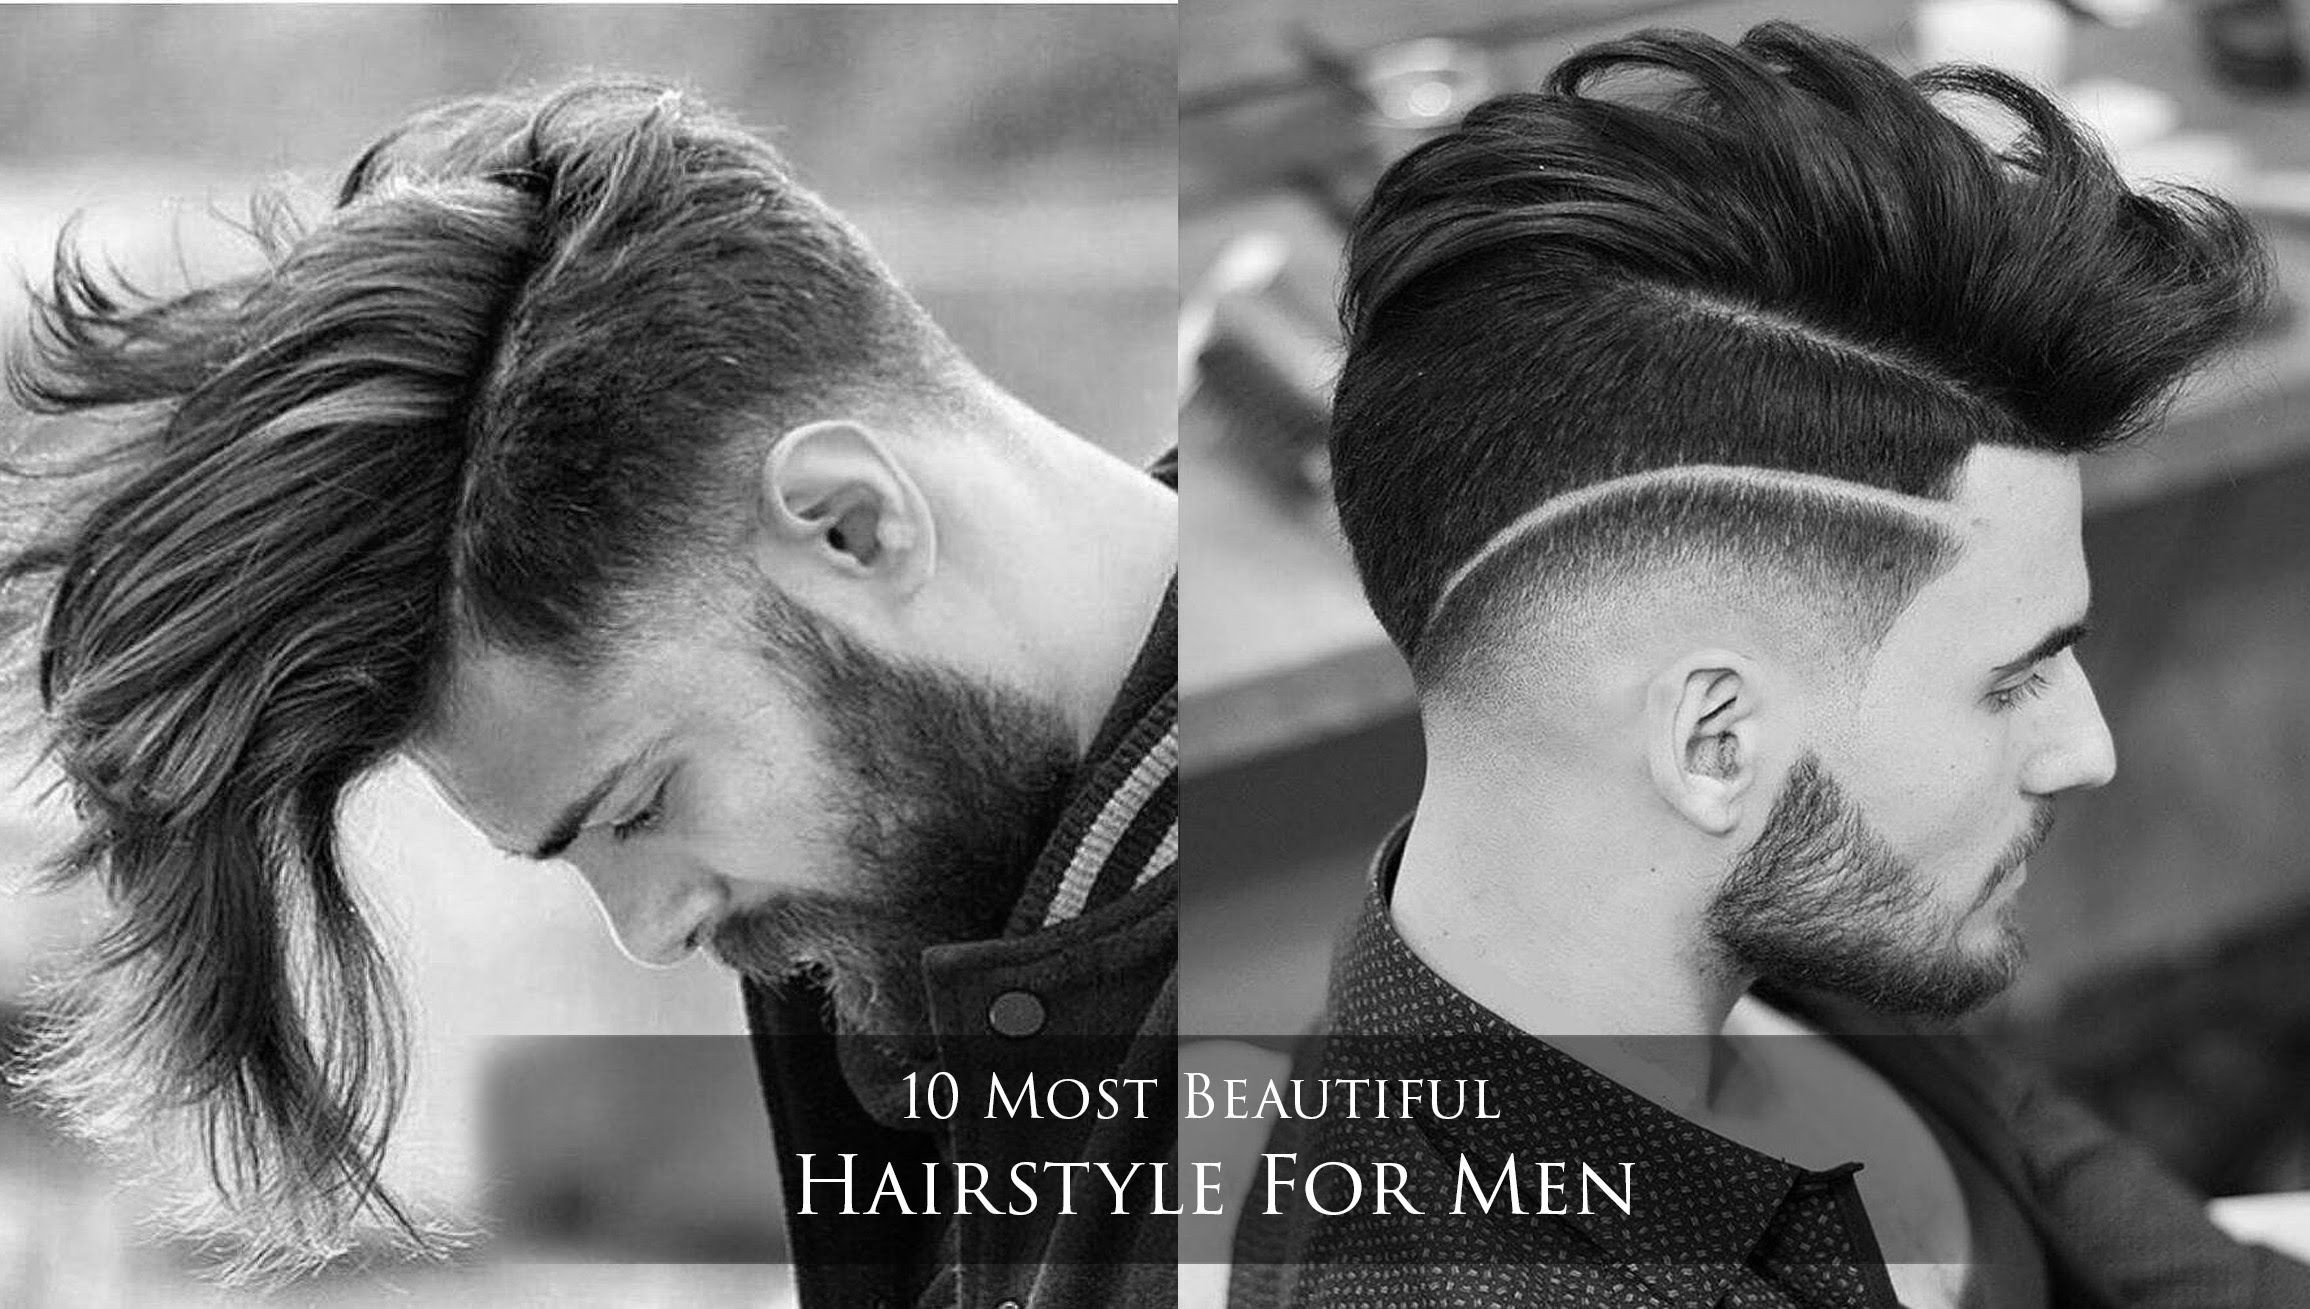 Top 10 Most Attractive Male Hairstyles
 10 Most Beautiful Hairstyle For Men 2016